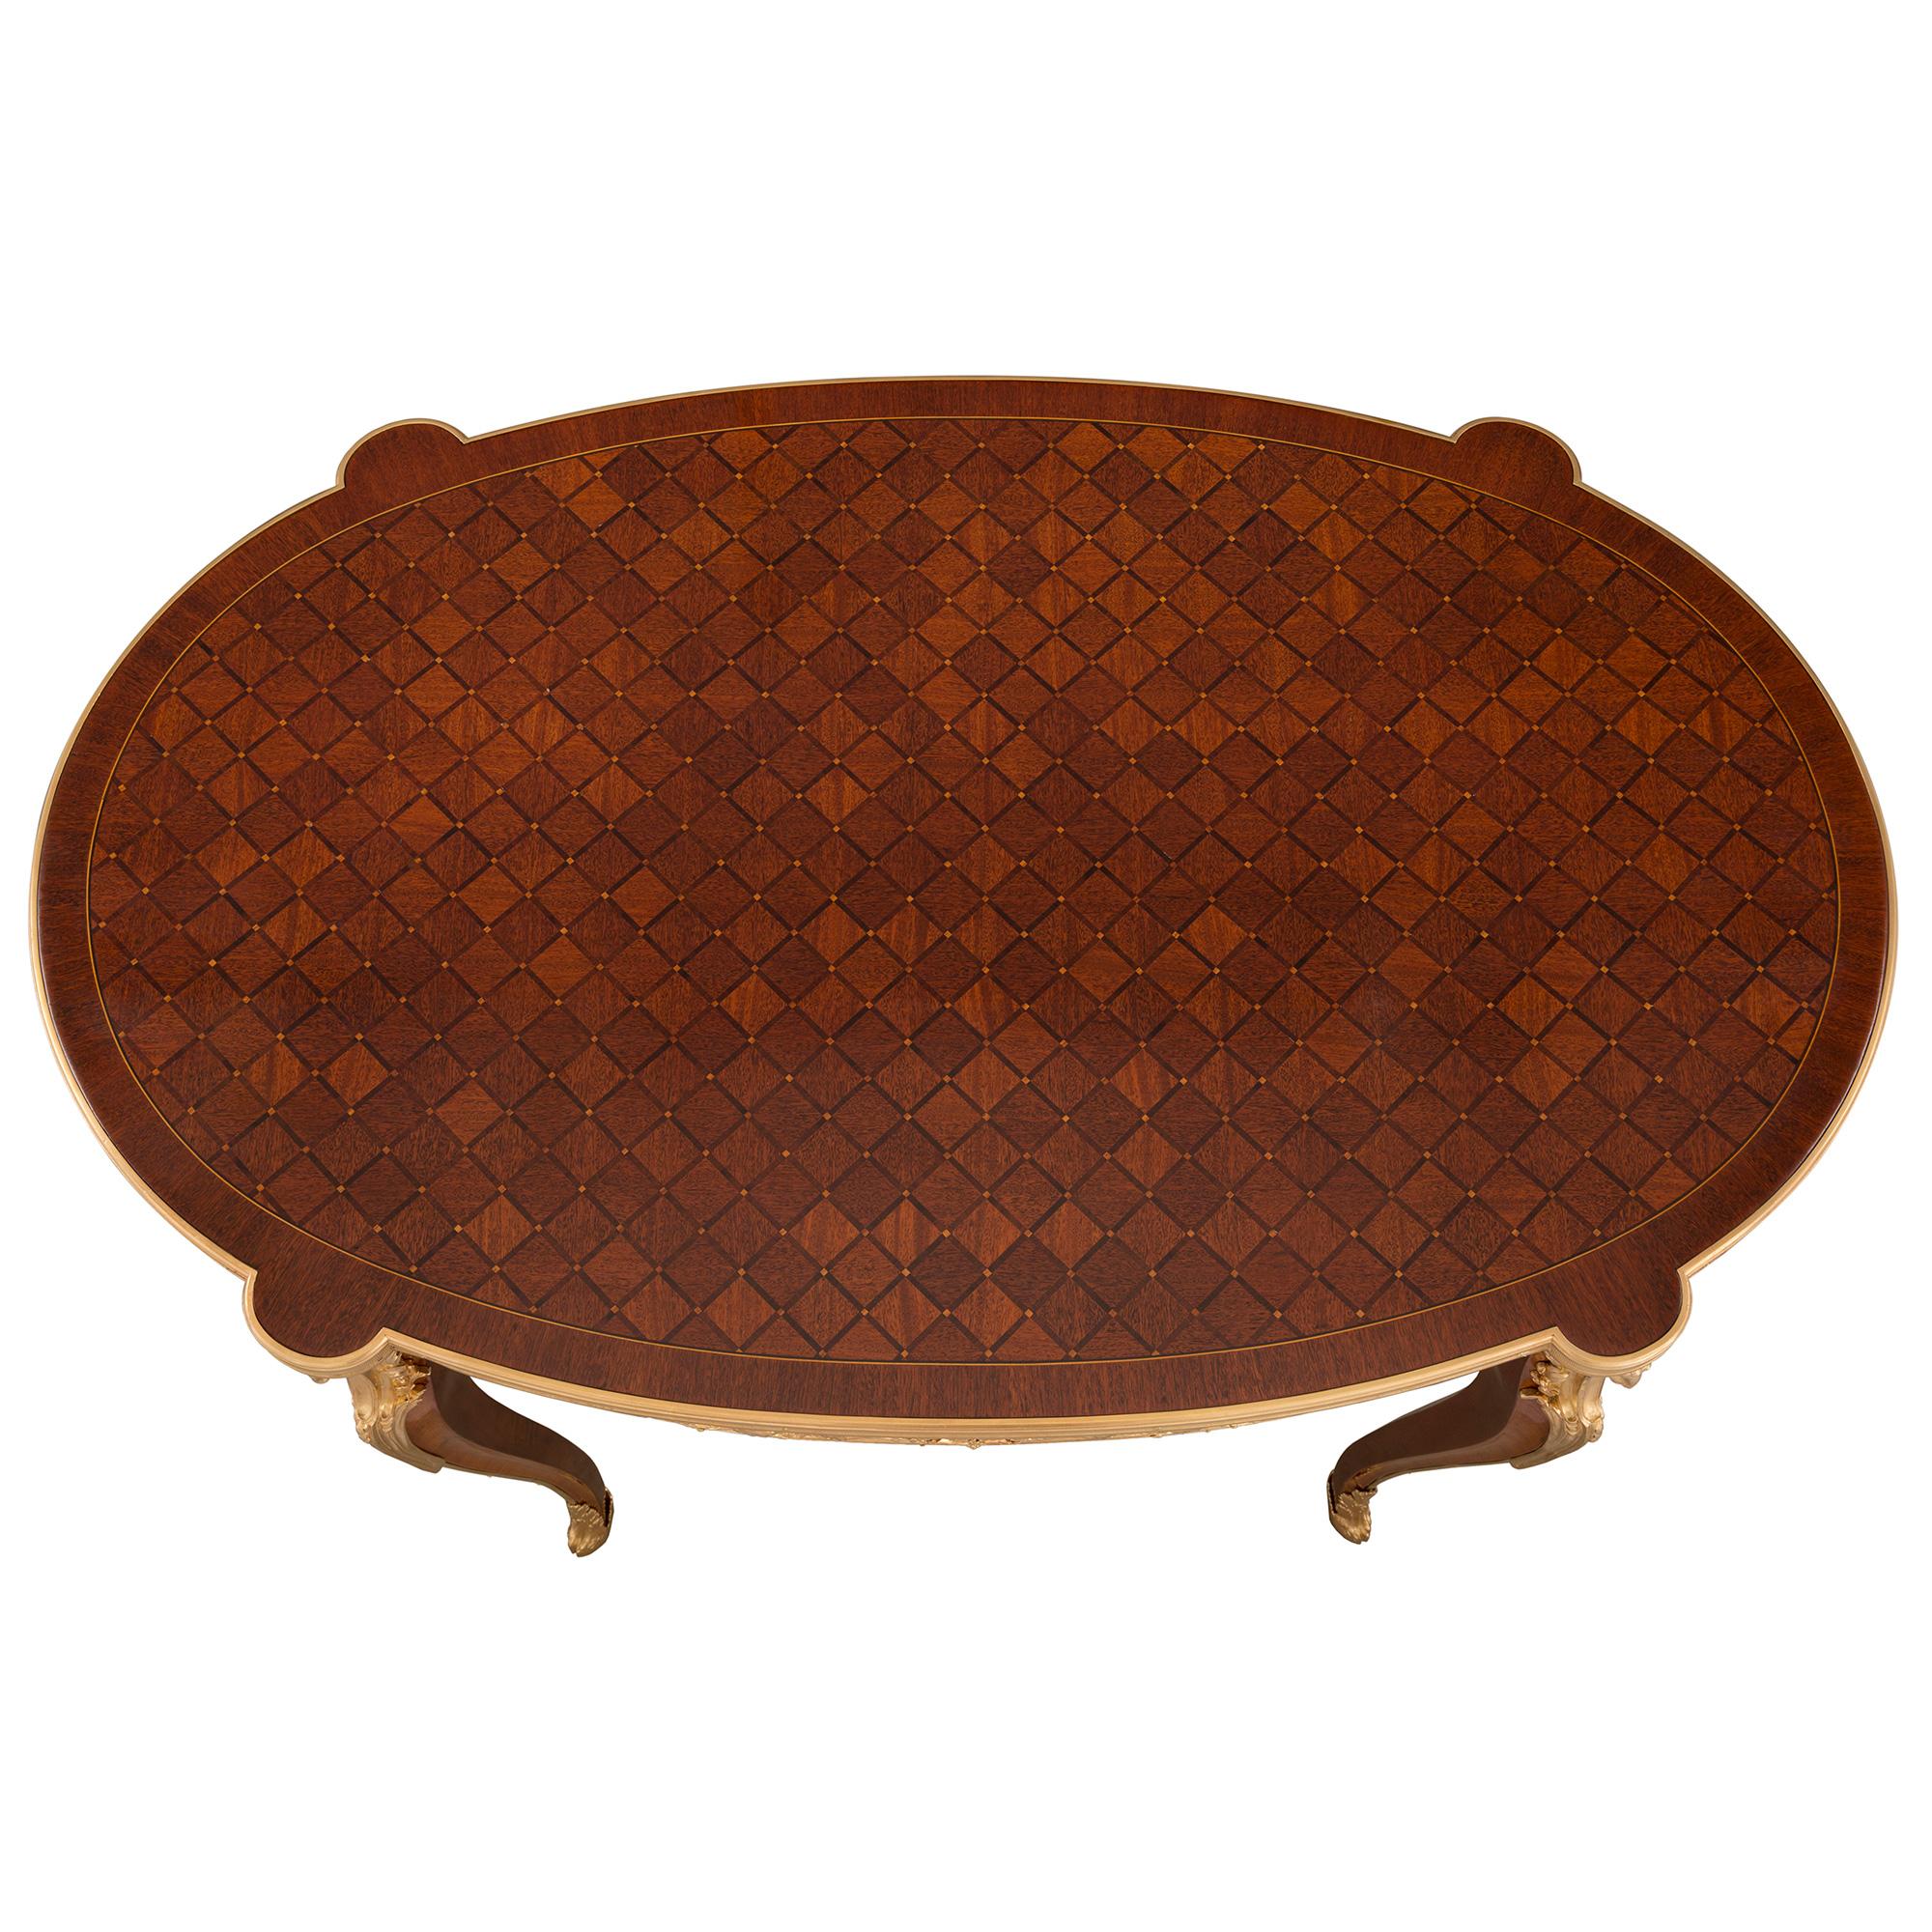 An exquisite French 19th century Louis XV st. Belle Époque period mahogany and ormolu oval side table/desk, signed Paul Sormani. The table is raised by slender cabriole legs with fine foliate wrap around sabots, hoof feet and with elegant ormolu